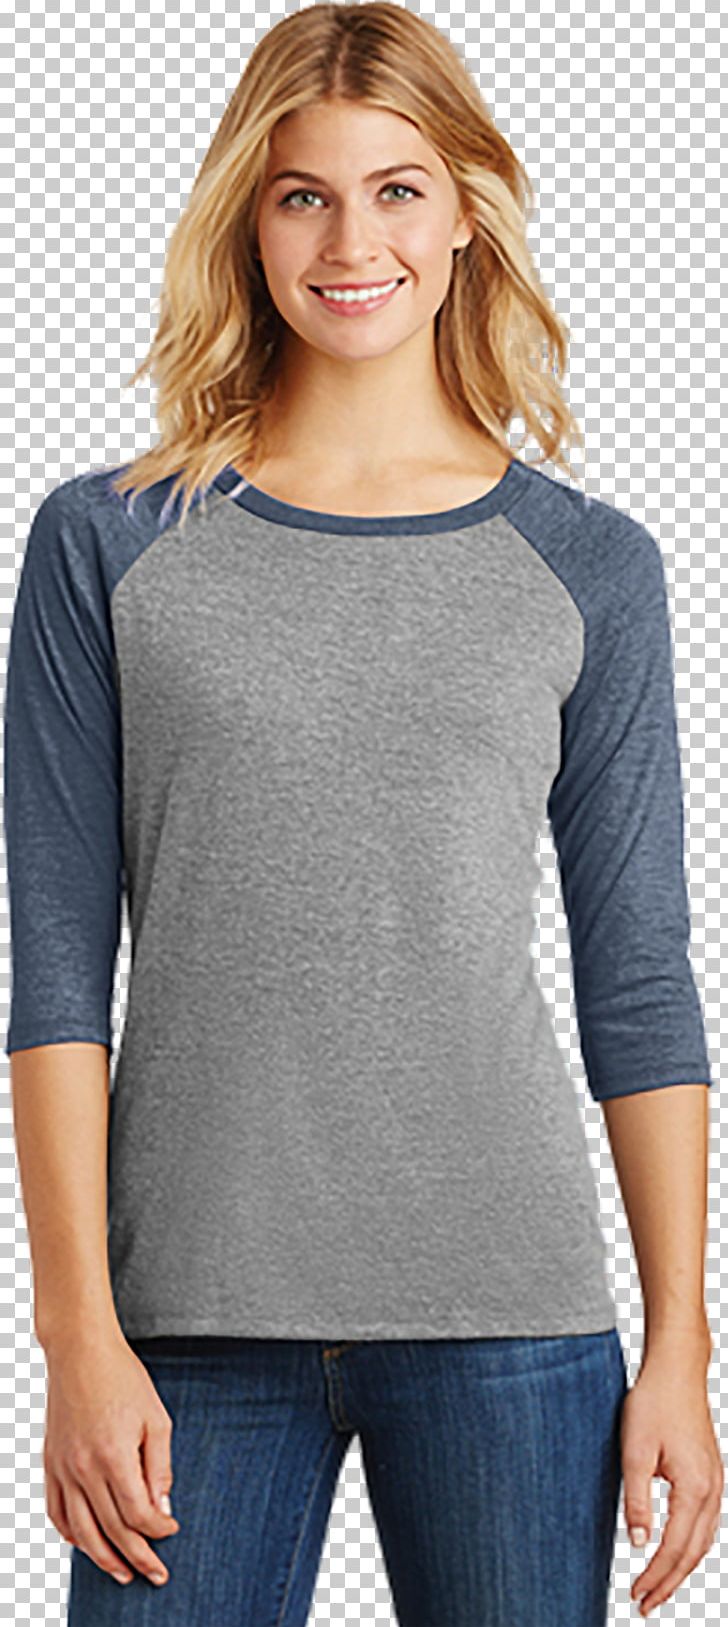 T-shirt Raglan Sleeve Clothing Top PNG, Clipart, Cap, Clothing, Clothing Sizes, Crew Neck, Fashion Free PNG Download